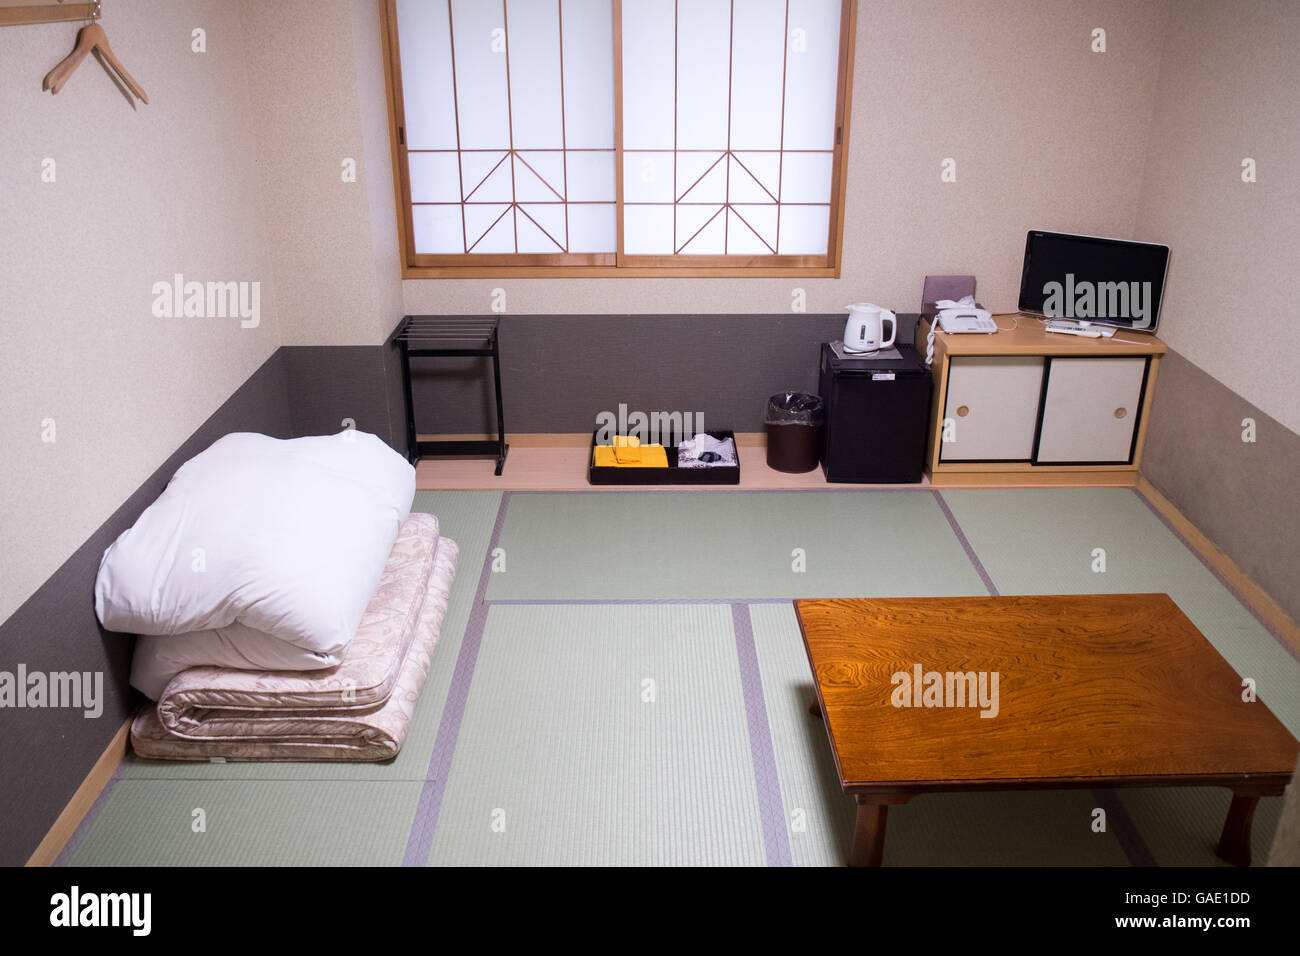 A room in a ryokan, a type of traditional Japanese inn. Stock Photo